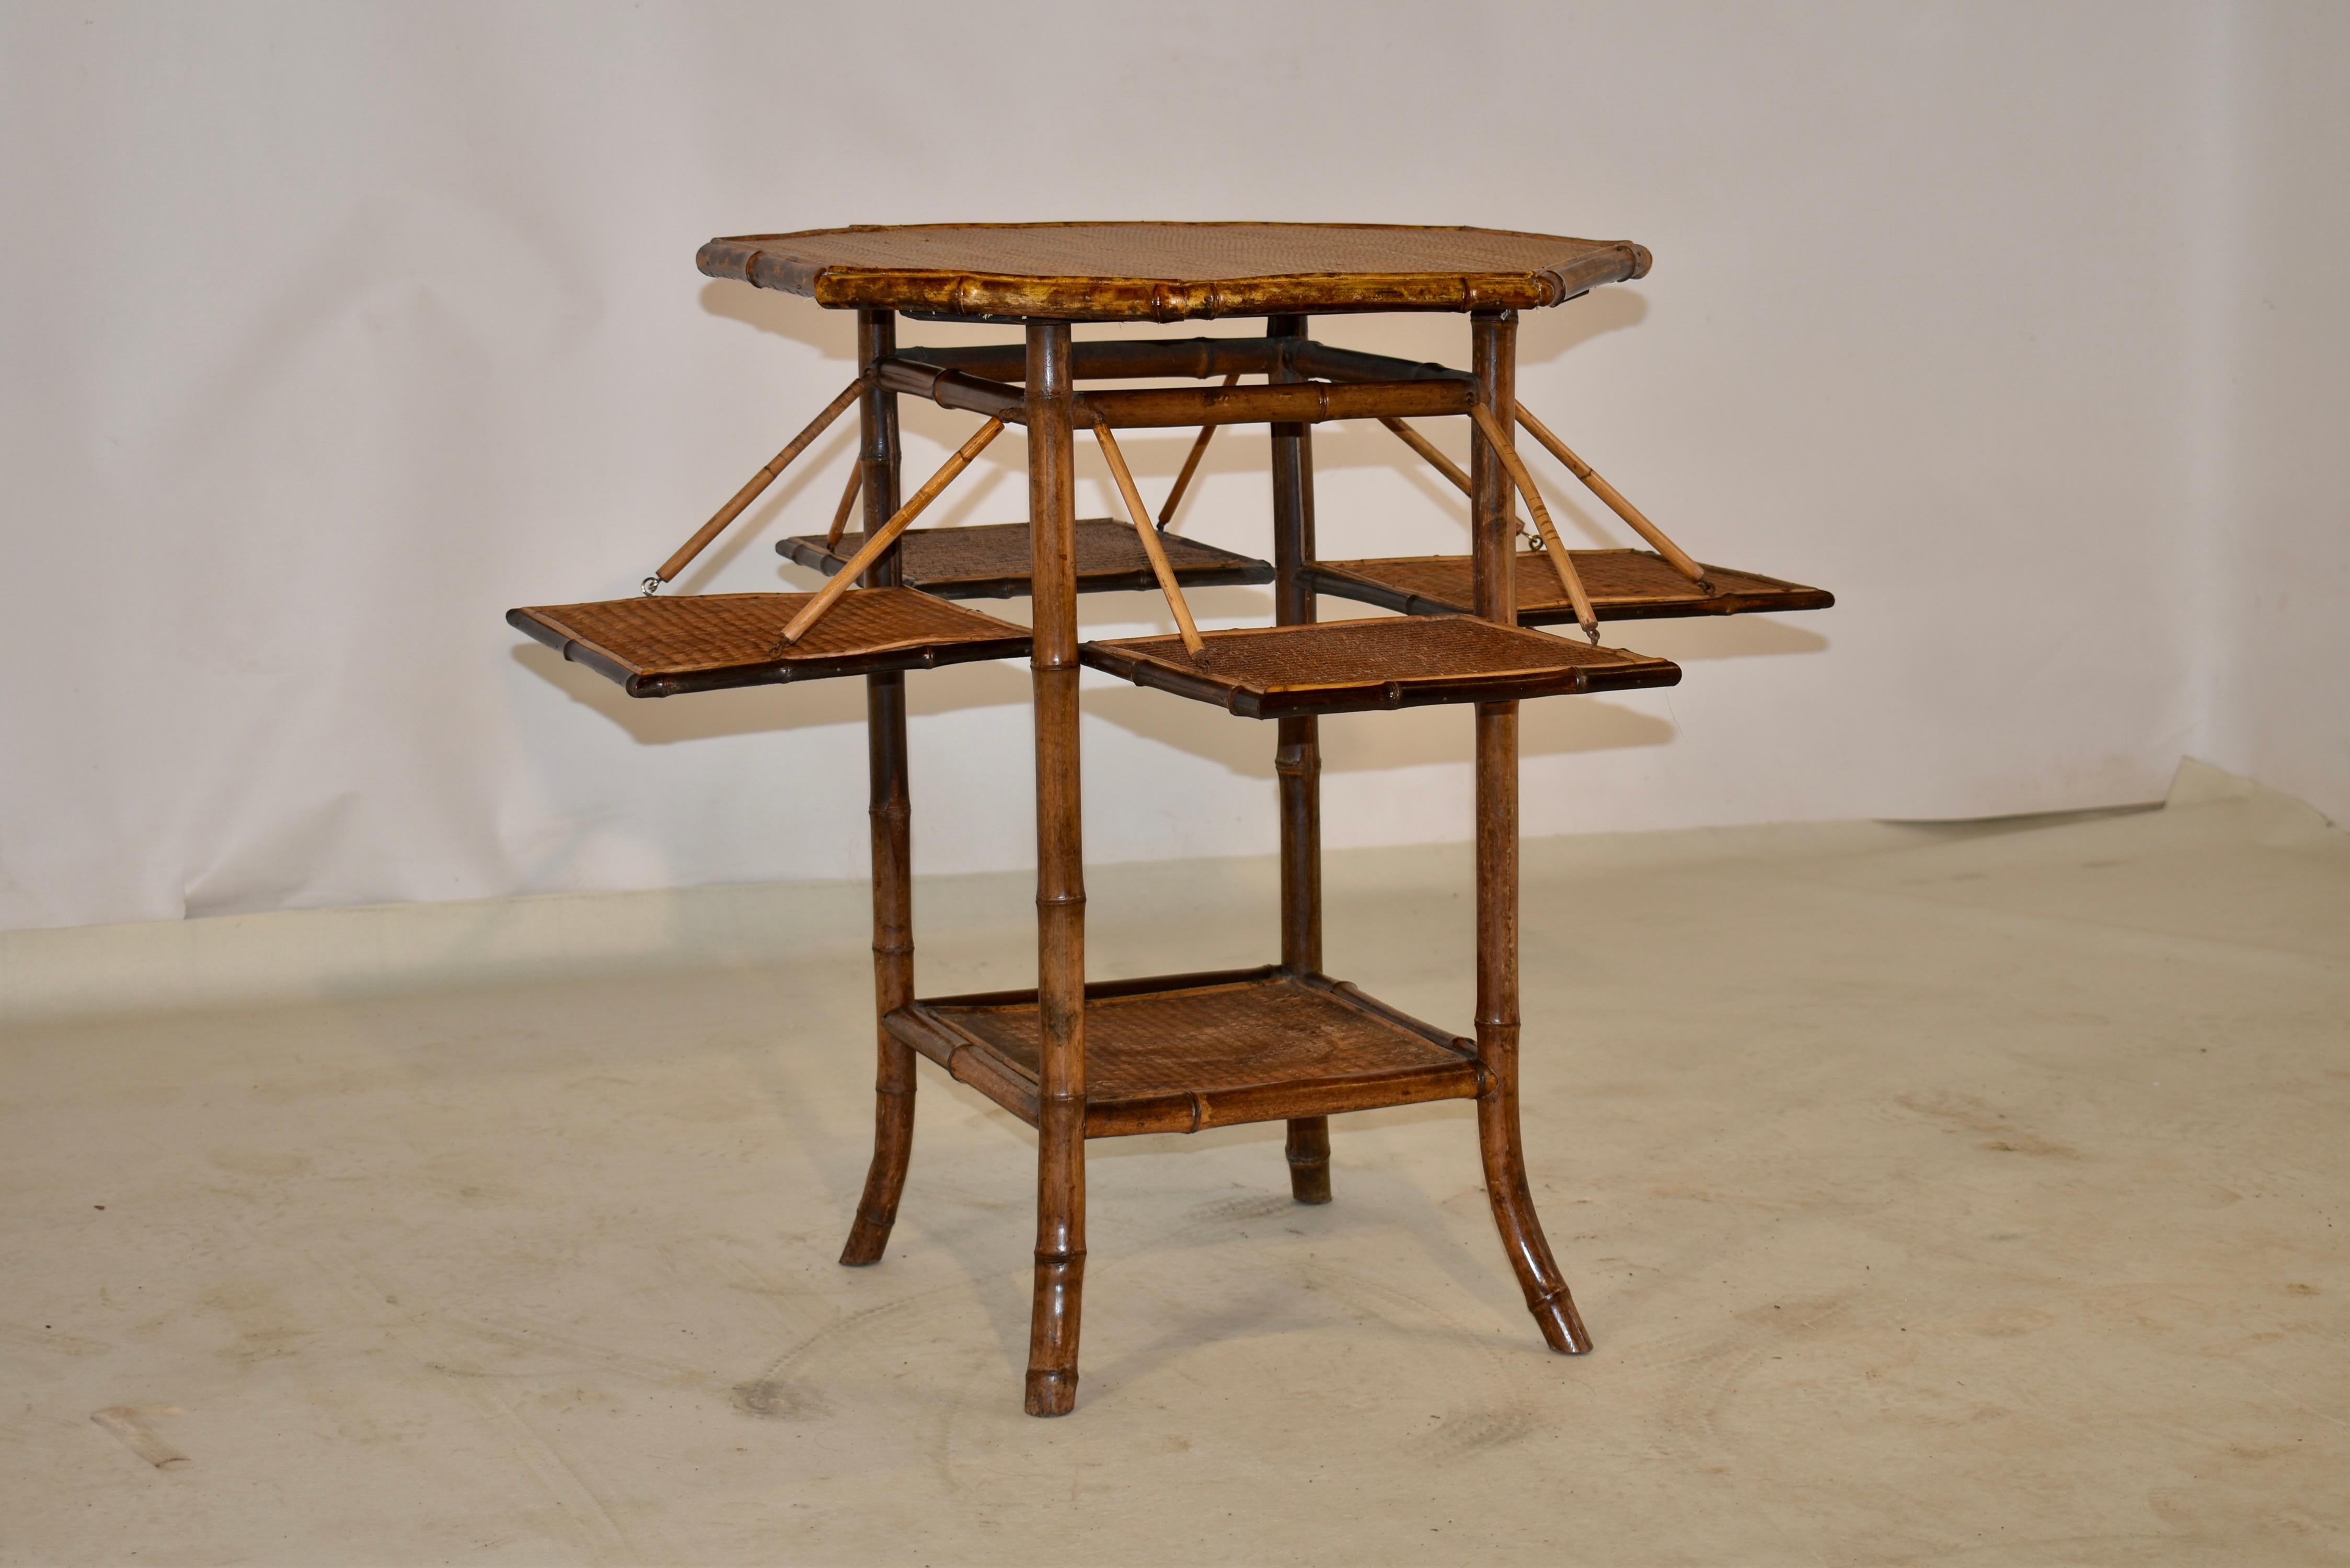 19th century bamboo table from France with rush covered top and shelves. The top is octagonal shaped and follows down to four mobile shelves, which open and close for easy storage, over splayed legs, joined by a lower shelf, which is also covered